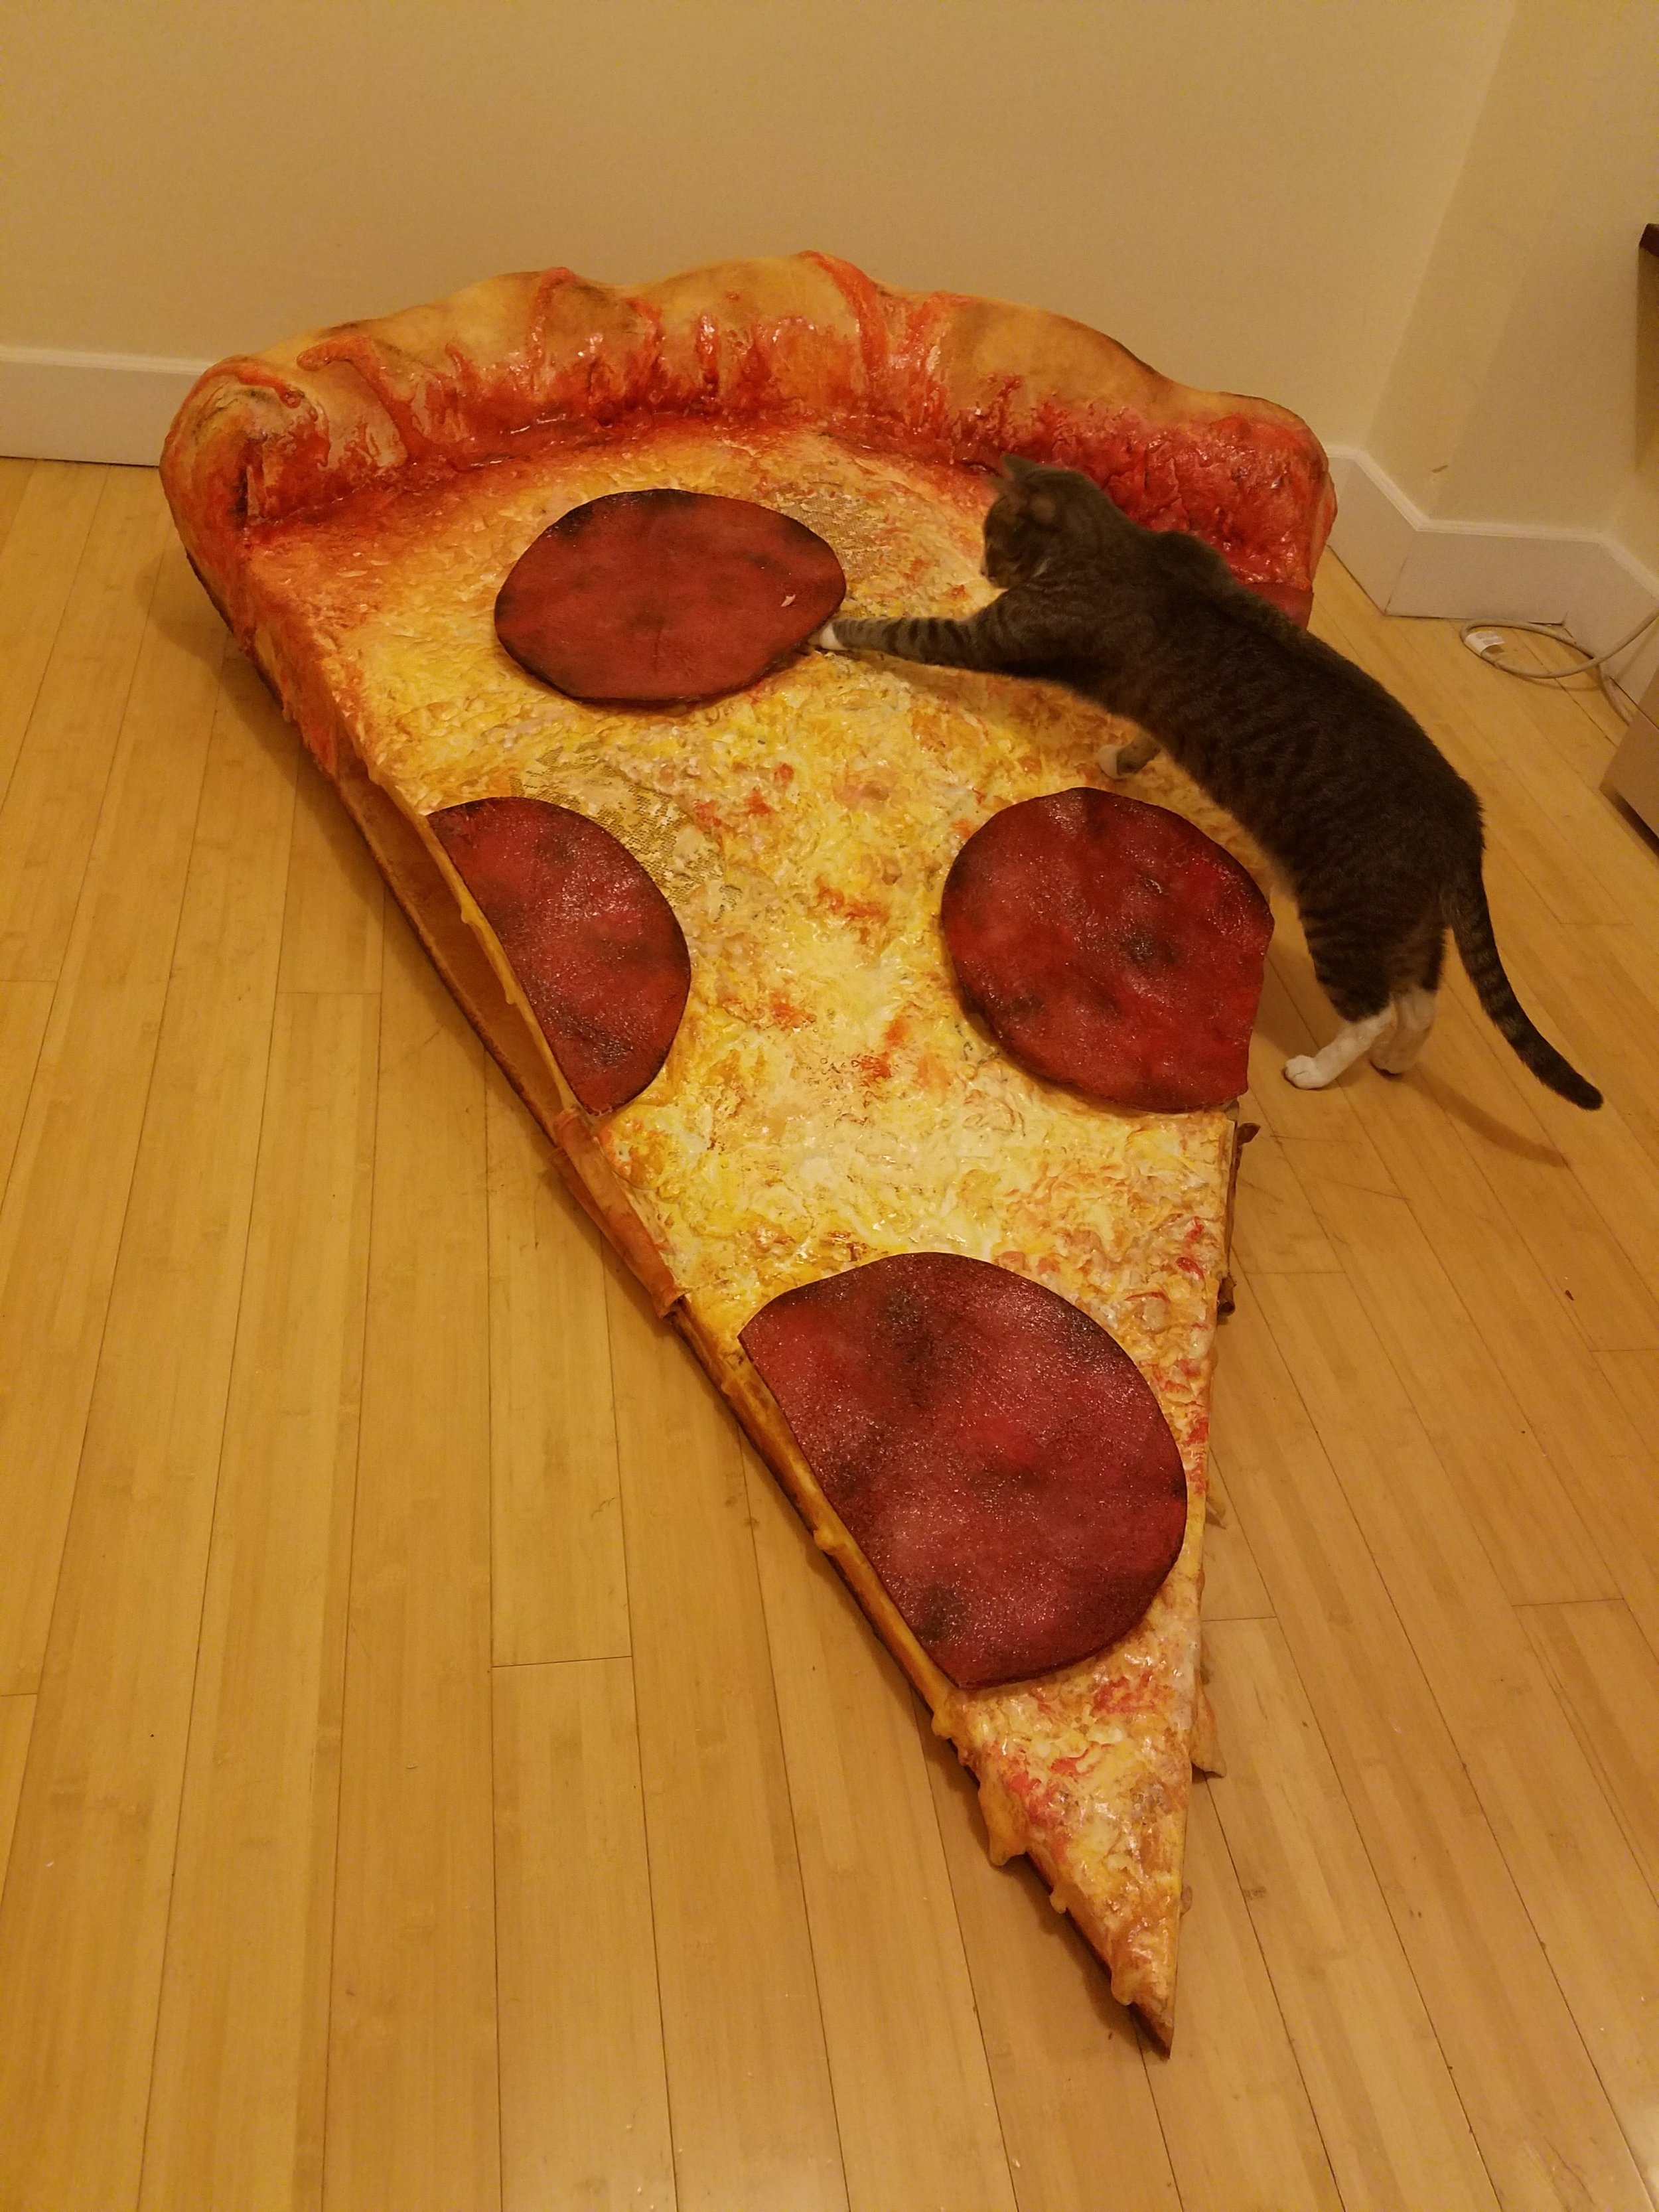  Pillo my assistant can't wait to try the pepperoni! 